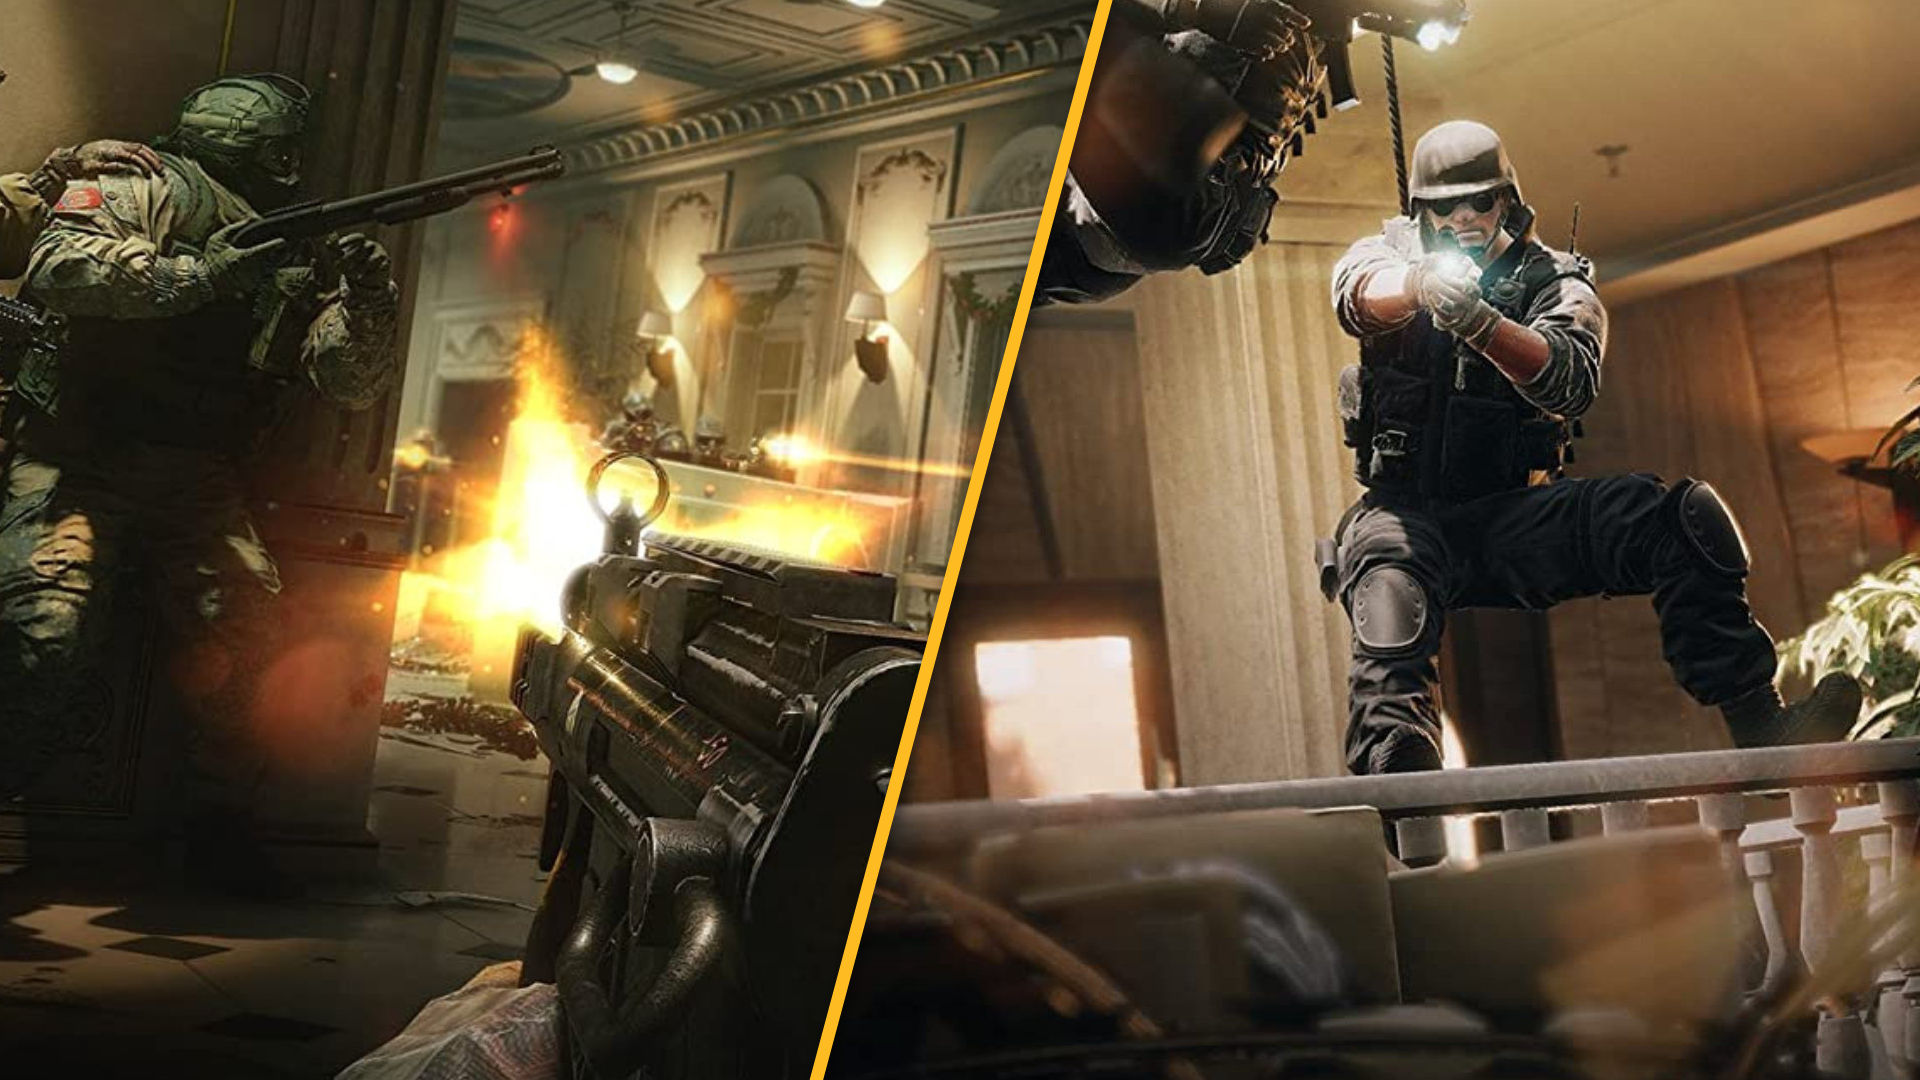 Rainbow Six Mobile OFFICIAL RELEASE DATE!